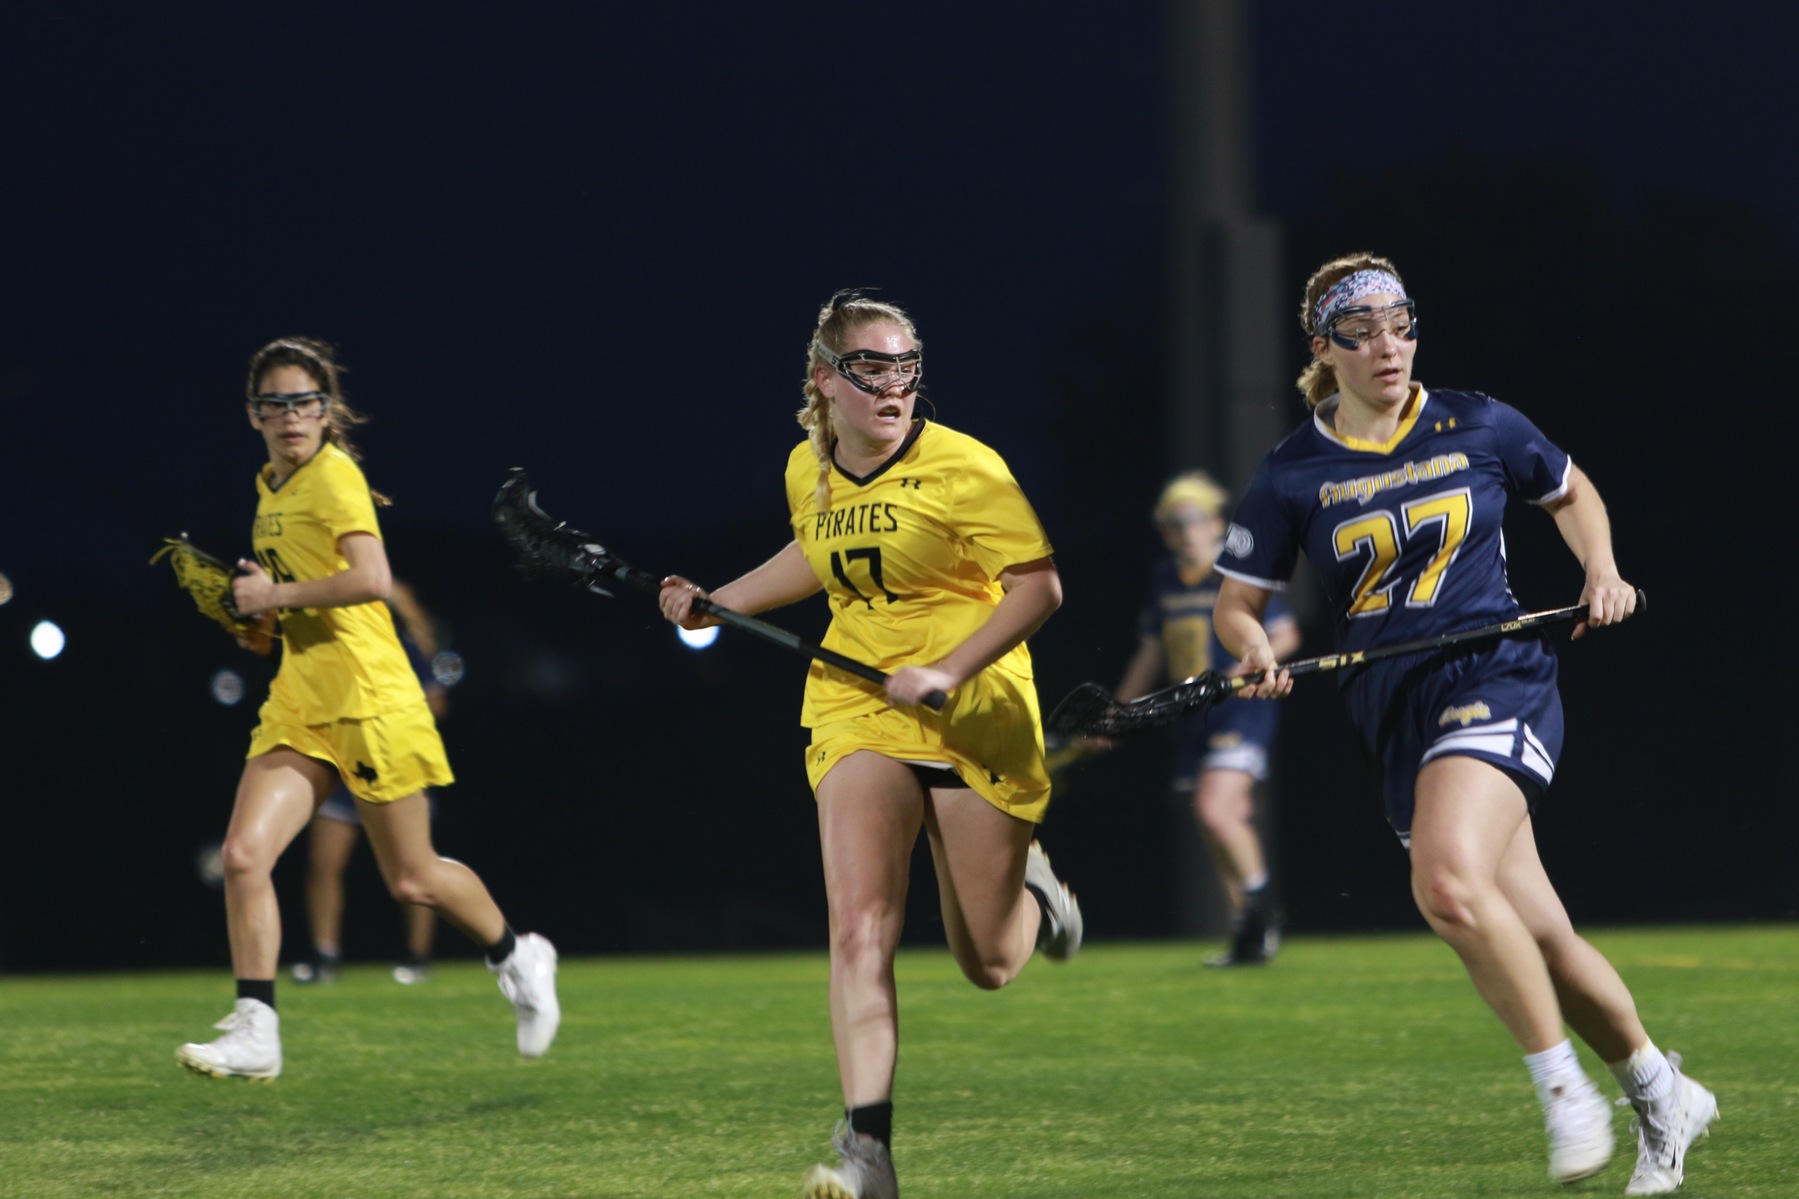 Women's Lacrosse Closes First Half on 9-2 Run to Defeat University of Dallas